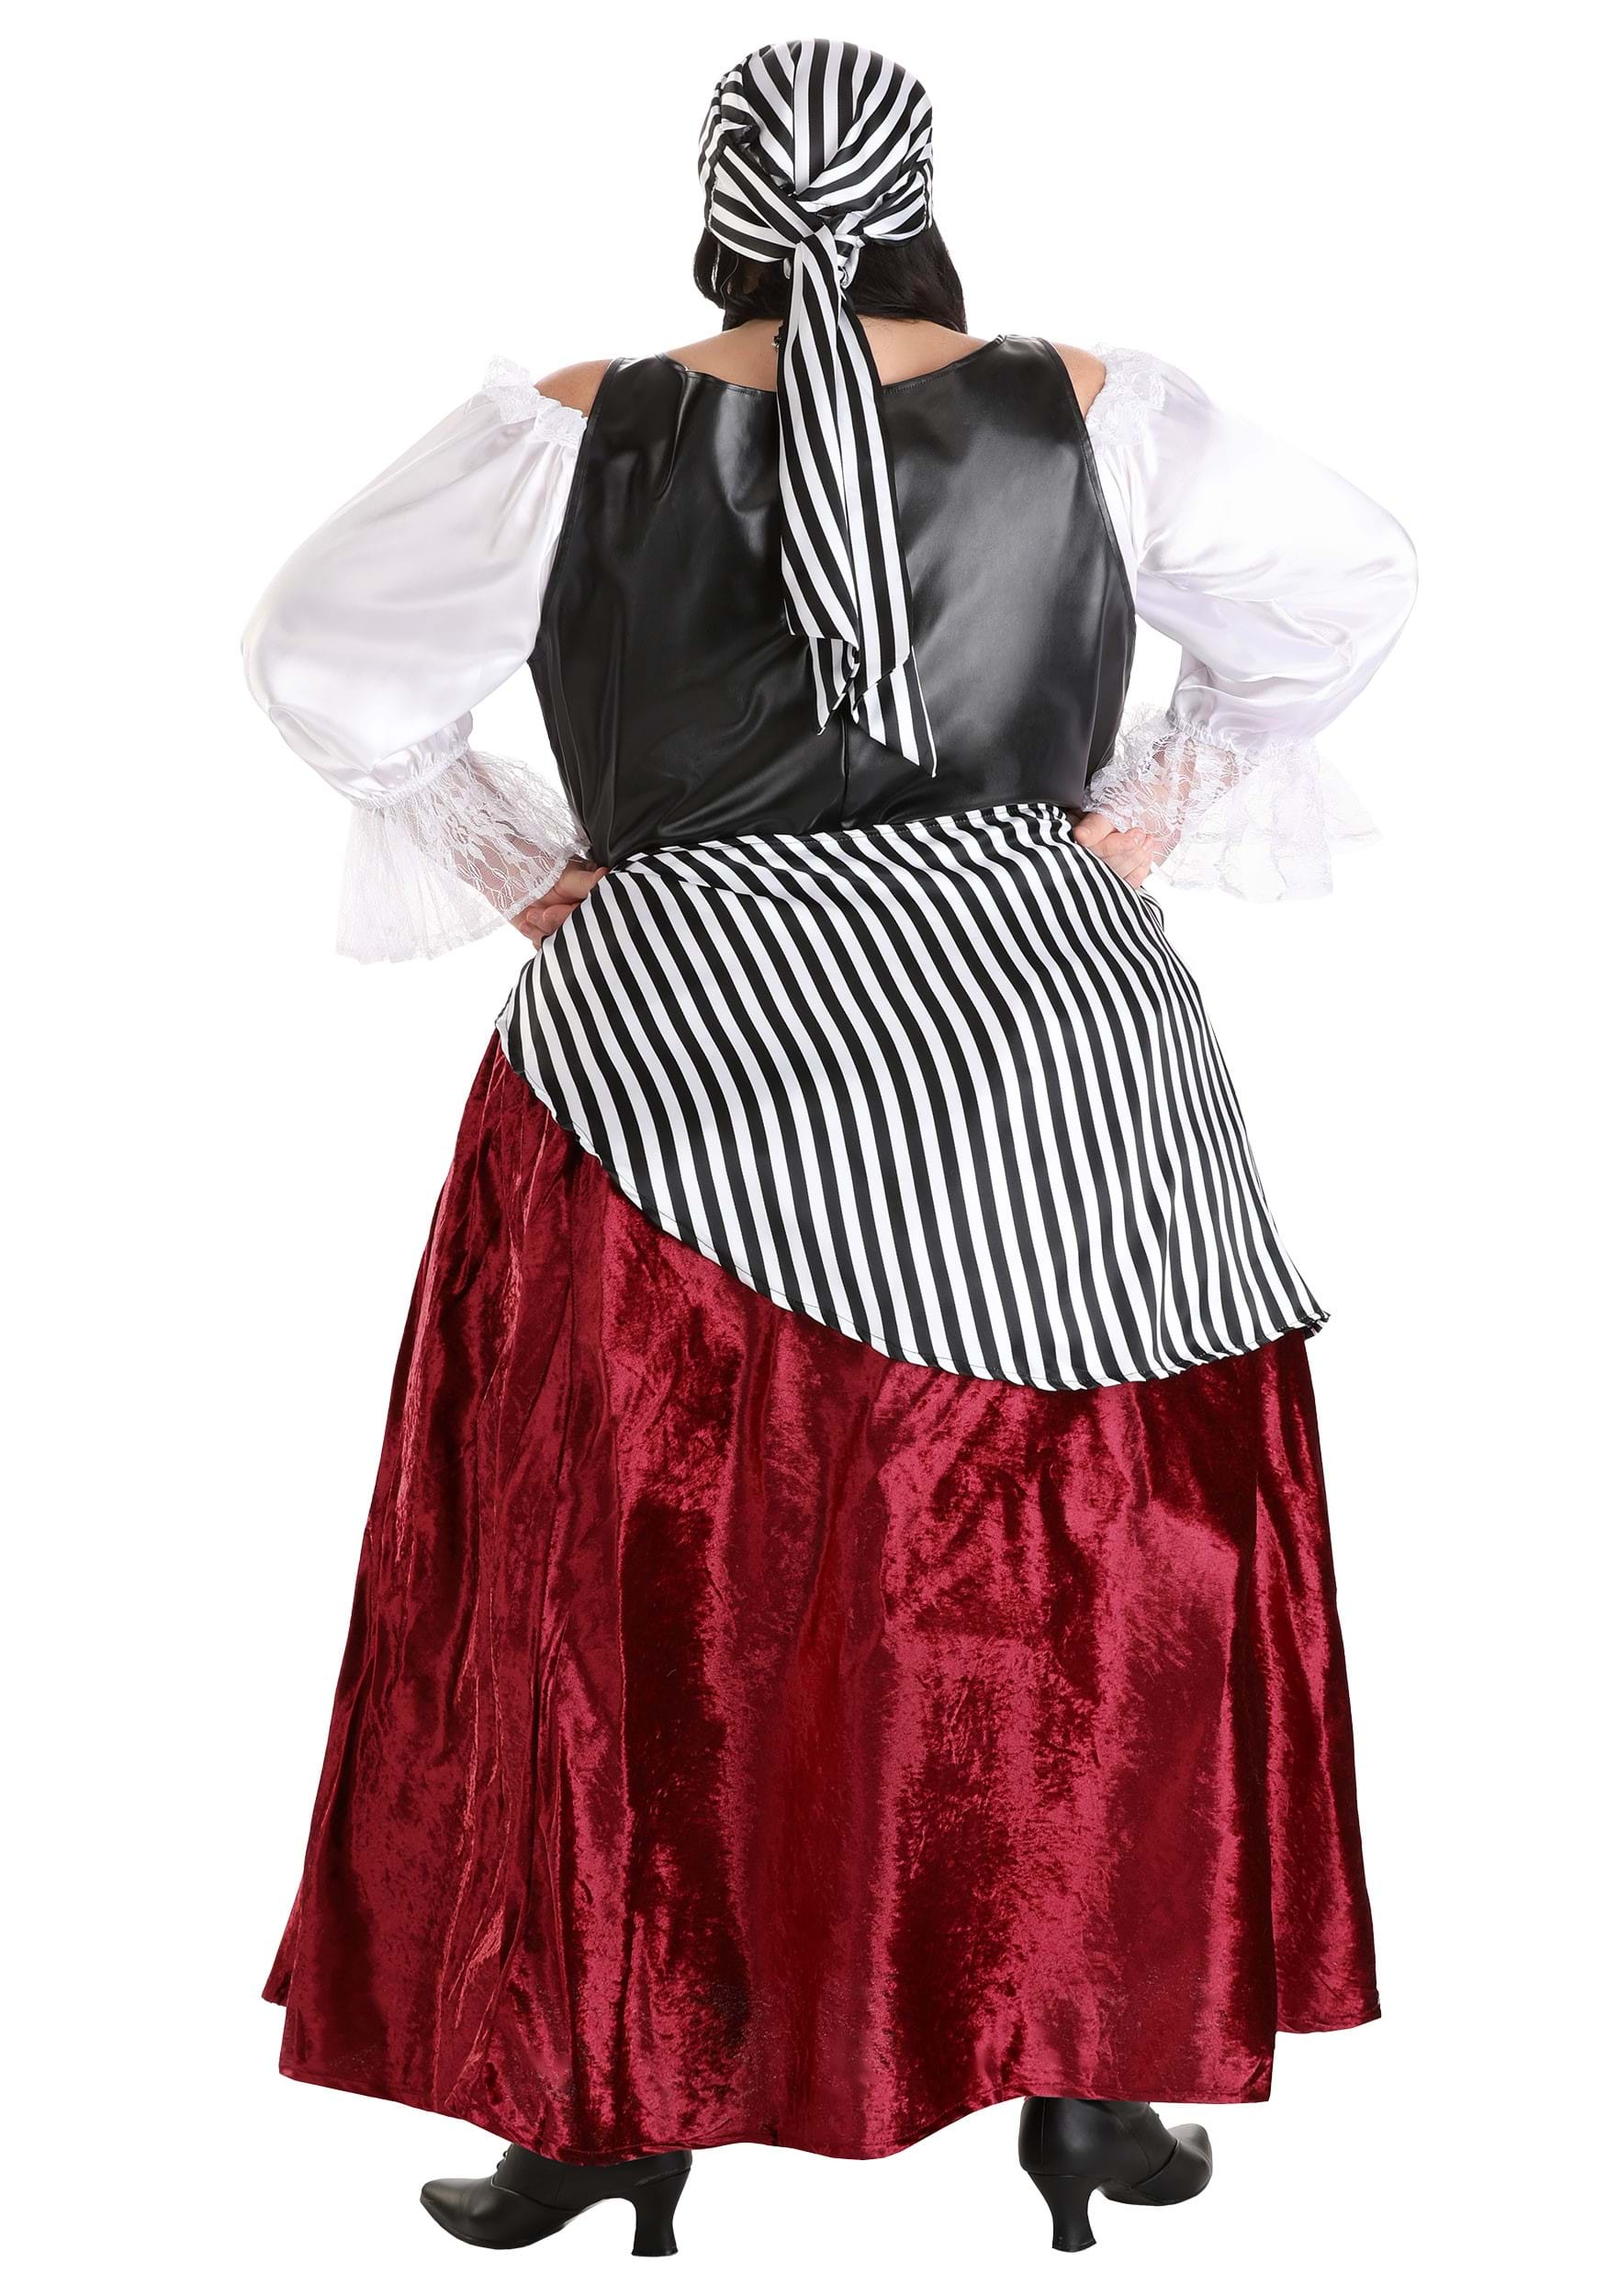 Deluxe Pirate Wench Plus Size Fancy Dress Costume For Women , Pirate Dress